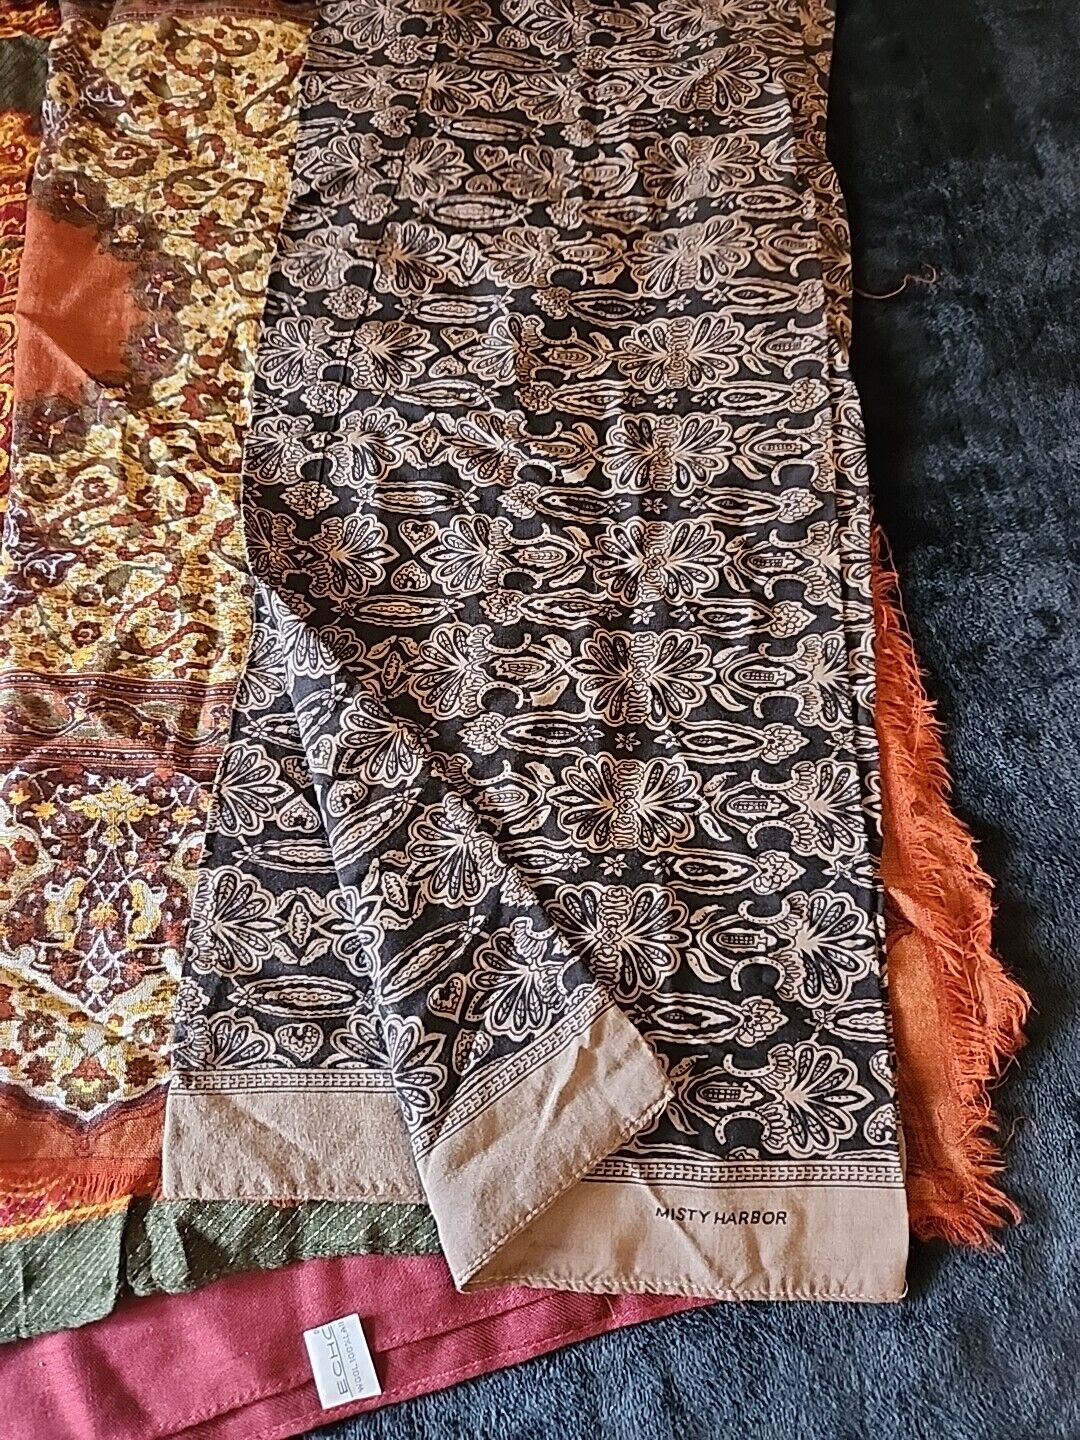 Lot of 11 Vintage Earth Tone Scarves & Wraps - image 8